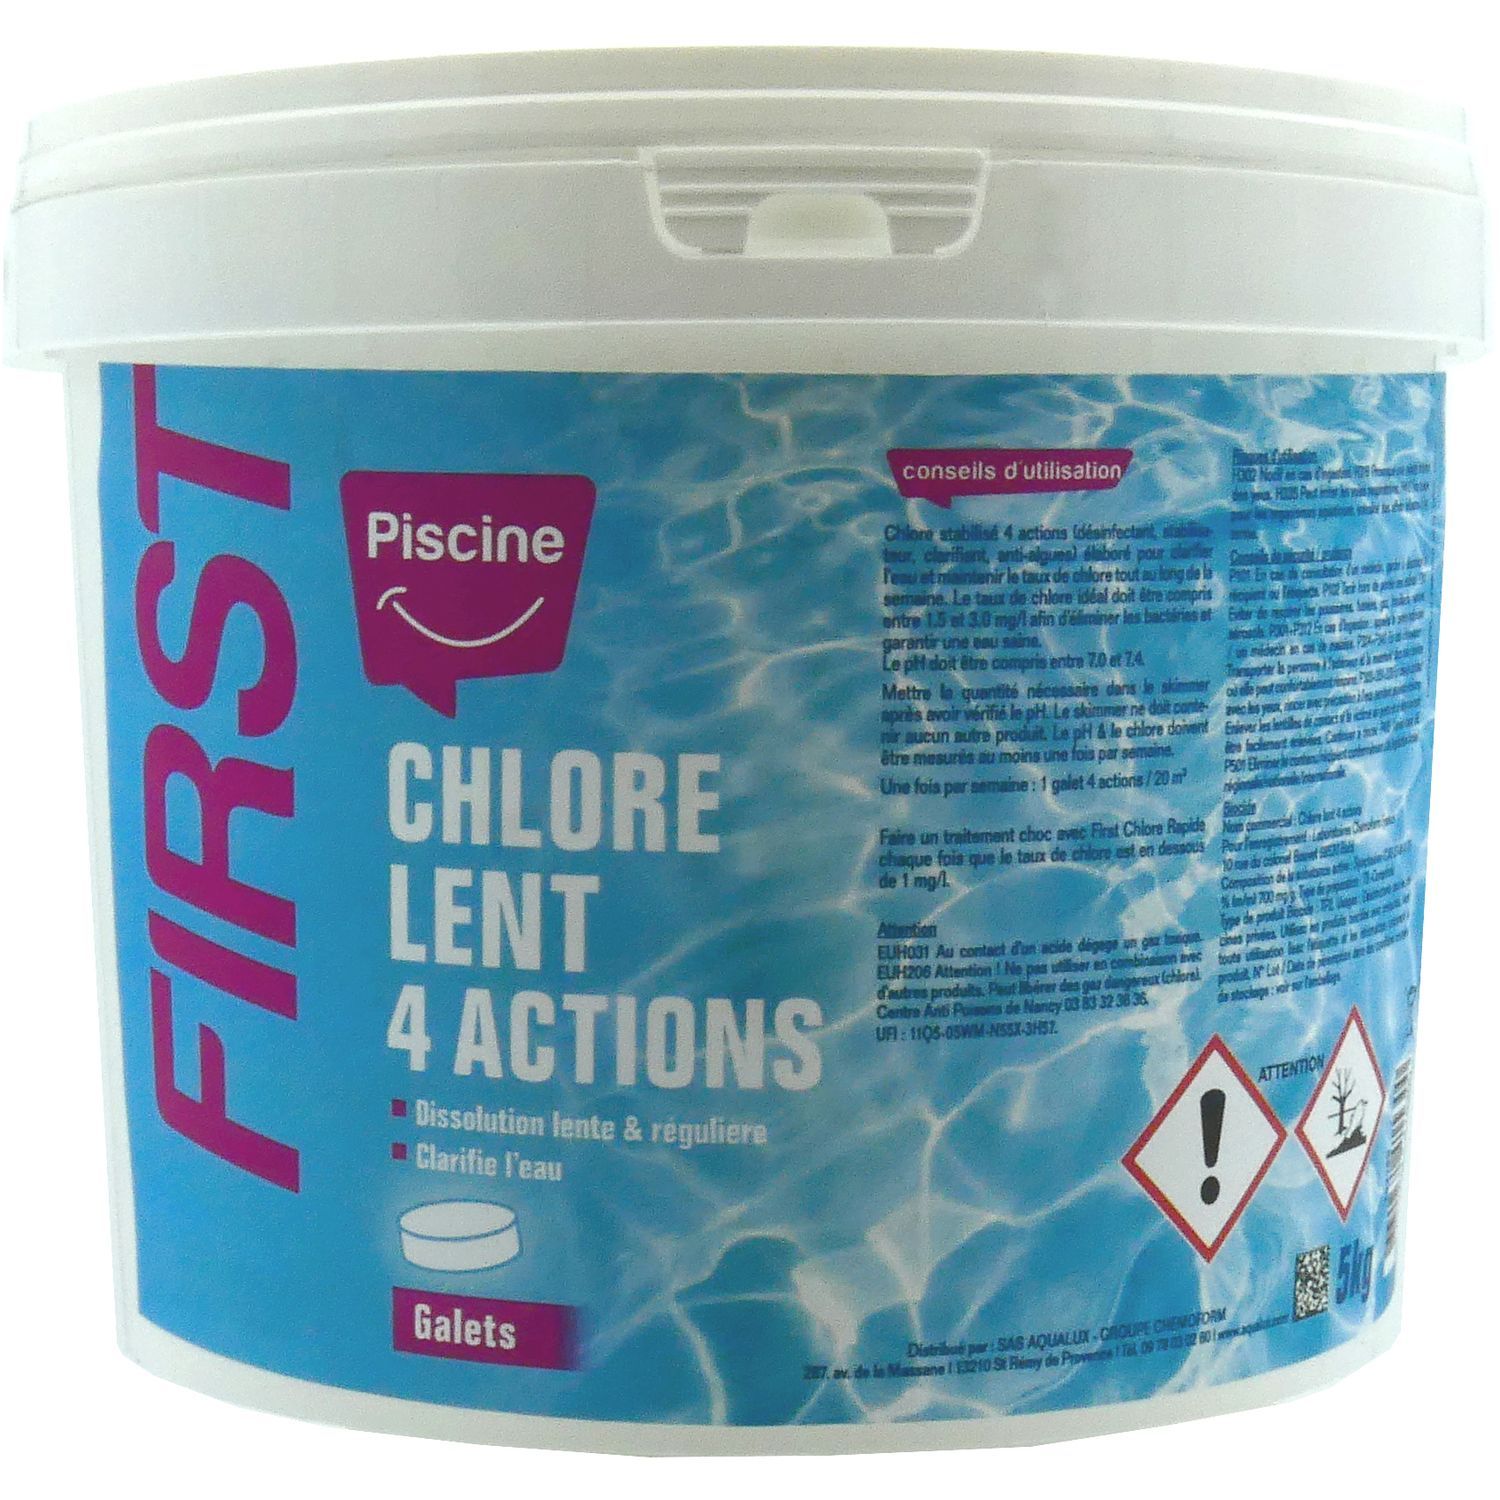 FIRST Chlore multifonction 5kg galets 200g pas cher 